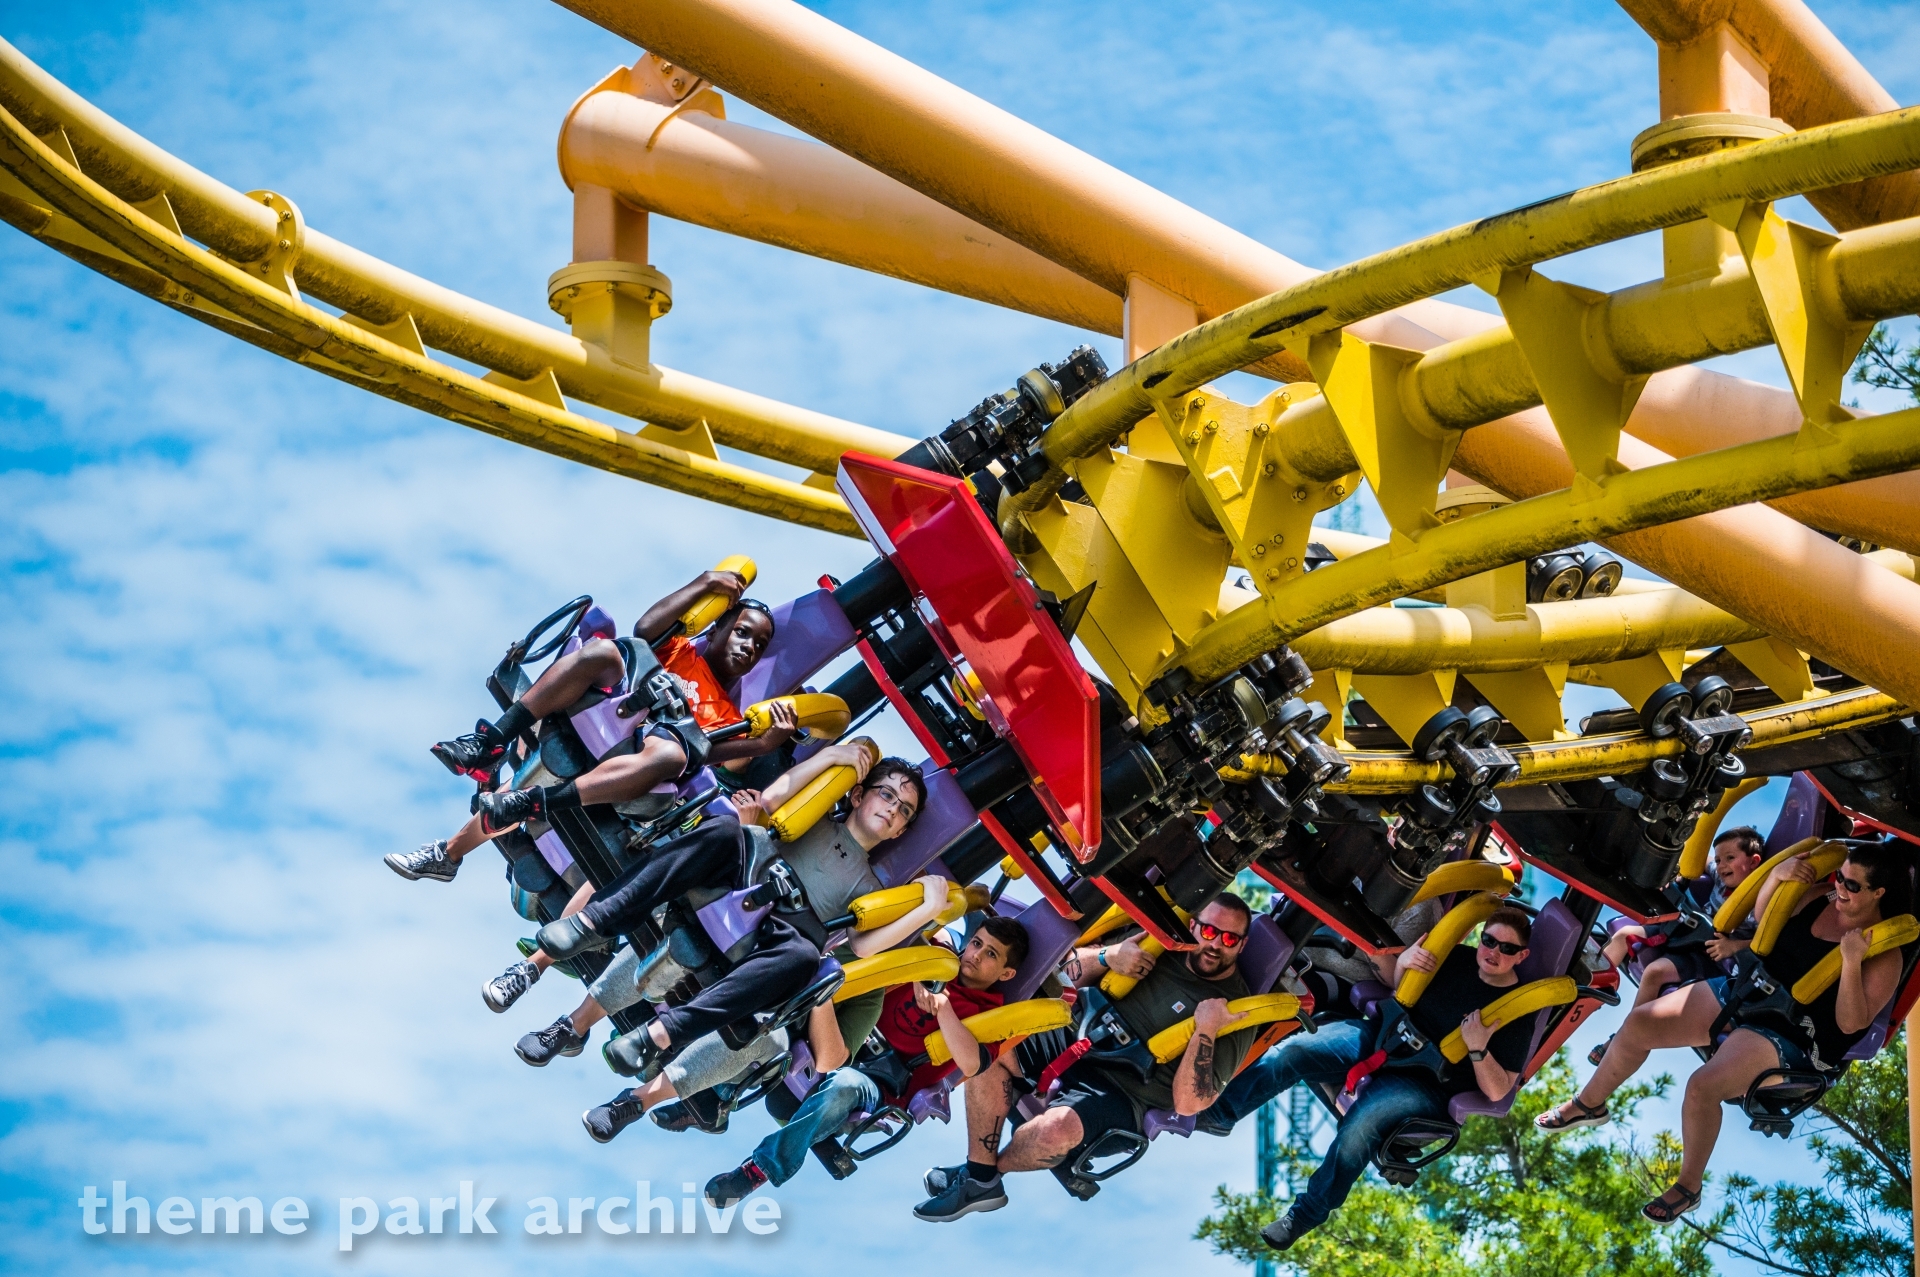 Flying Ace Aerial Chase at Kings Island